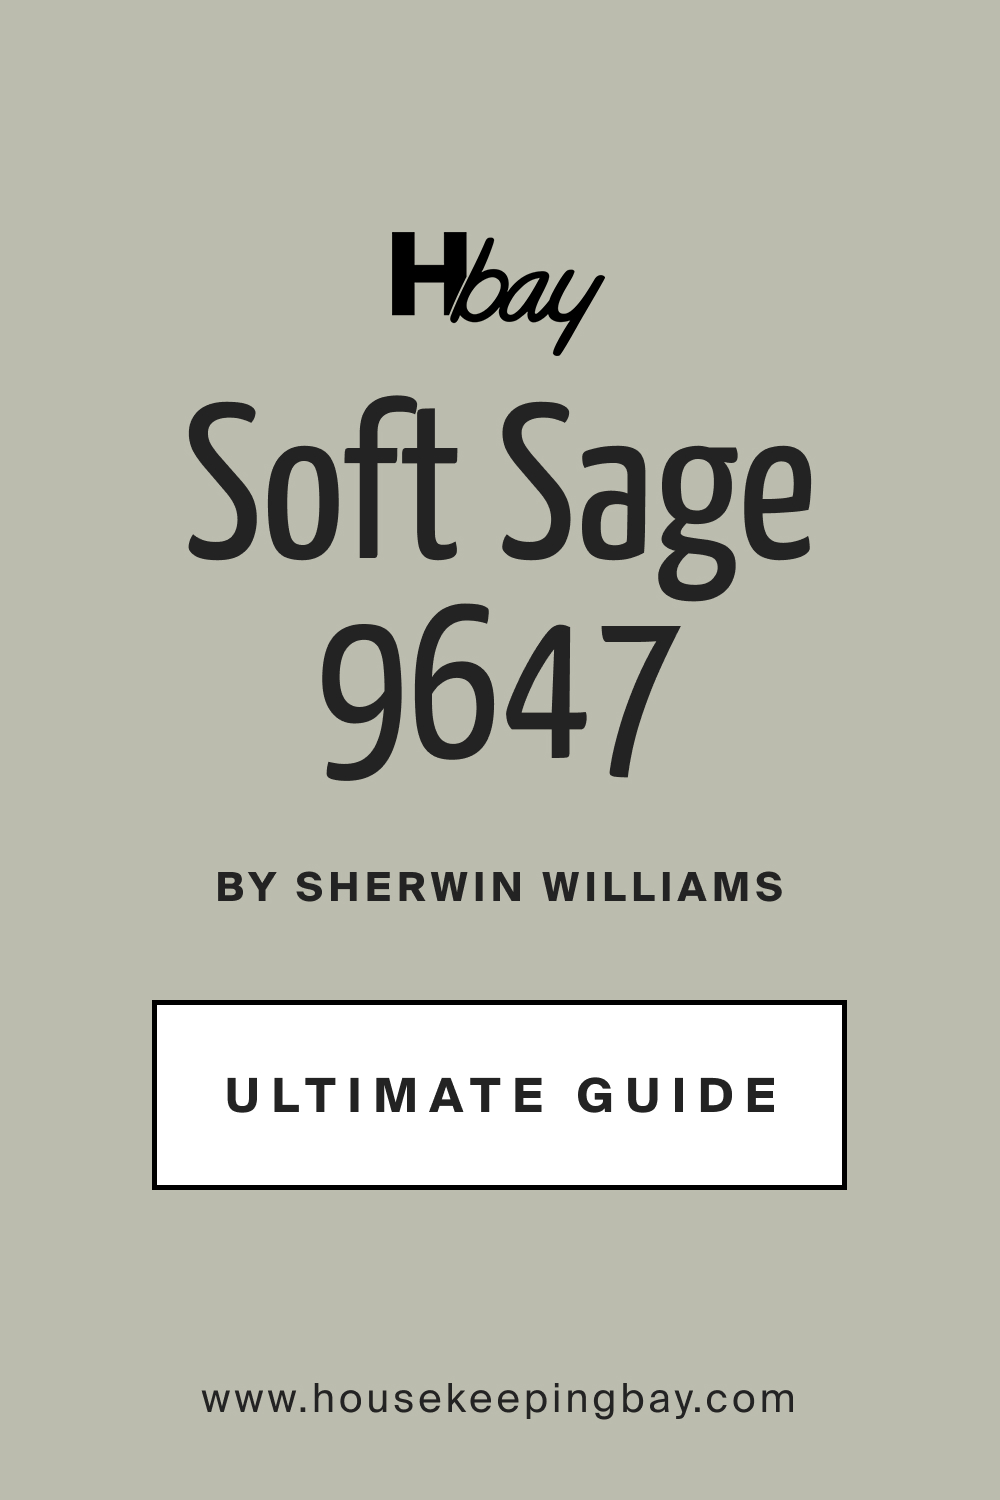 SW 9647 Soft Sage by Sherwin Williams Ultimate Guide